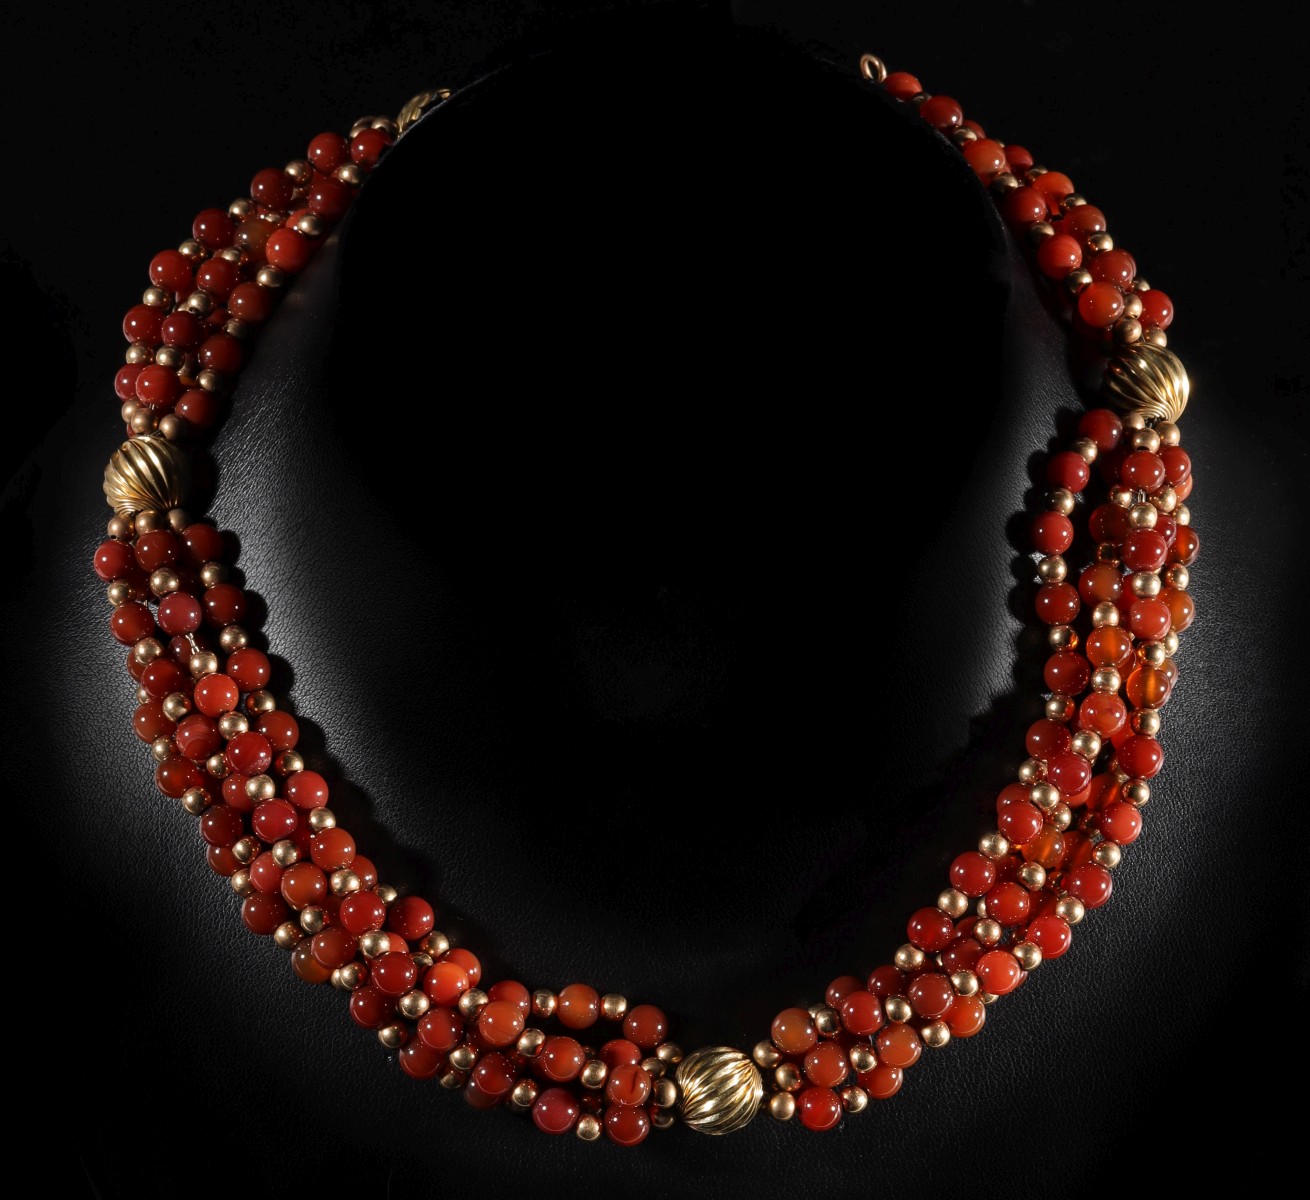 A CARNELIAN BEAD MULTI-STRAND NECKLACE WITH 14K GOLD